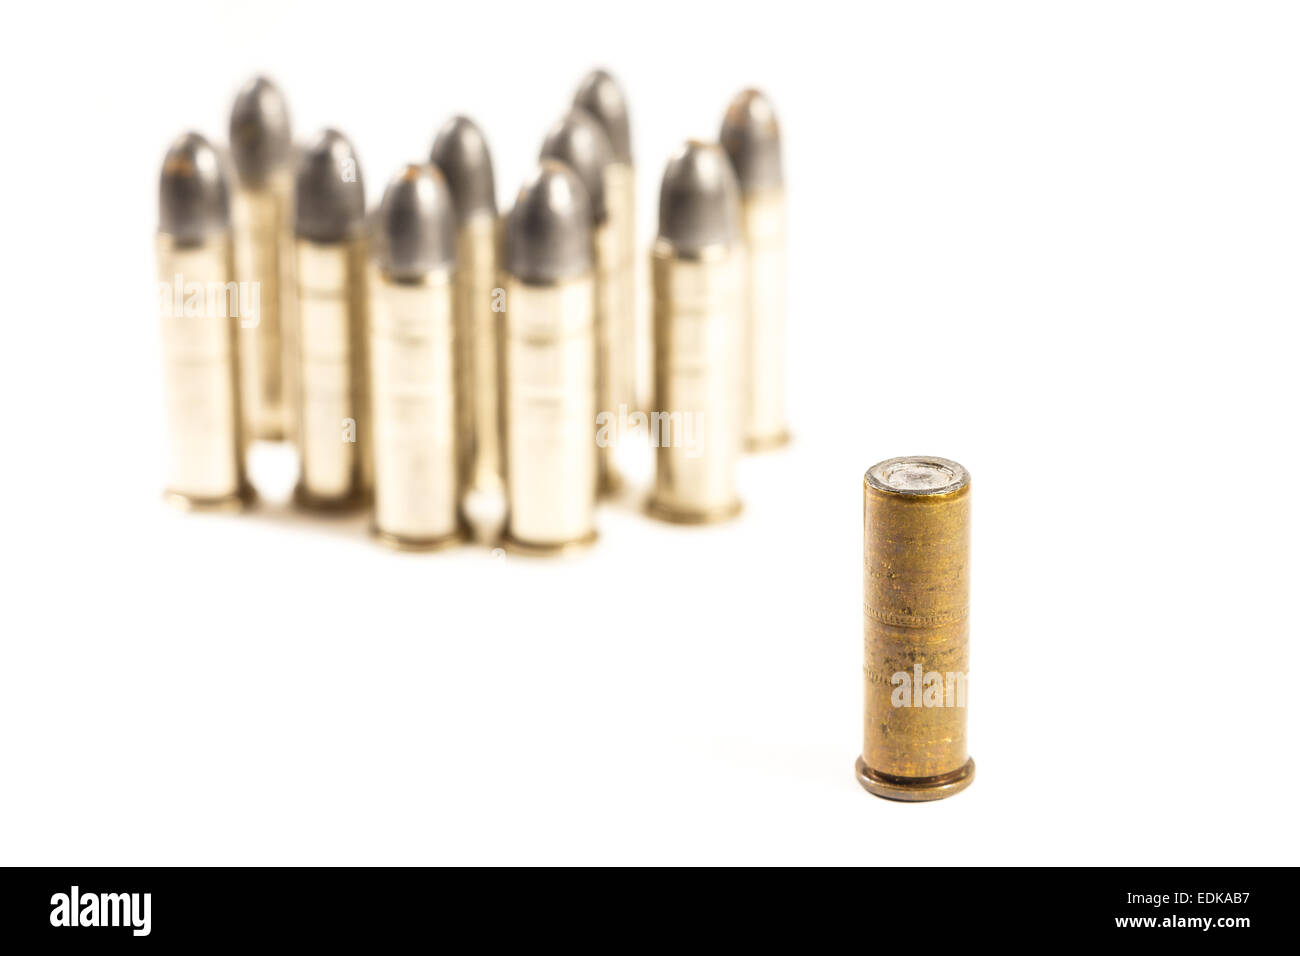 Think different (group of bullets and single bullet on white background) Stock Photo